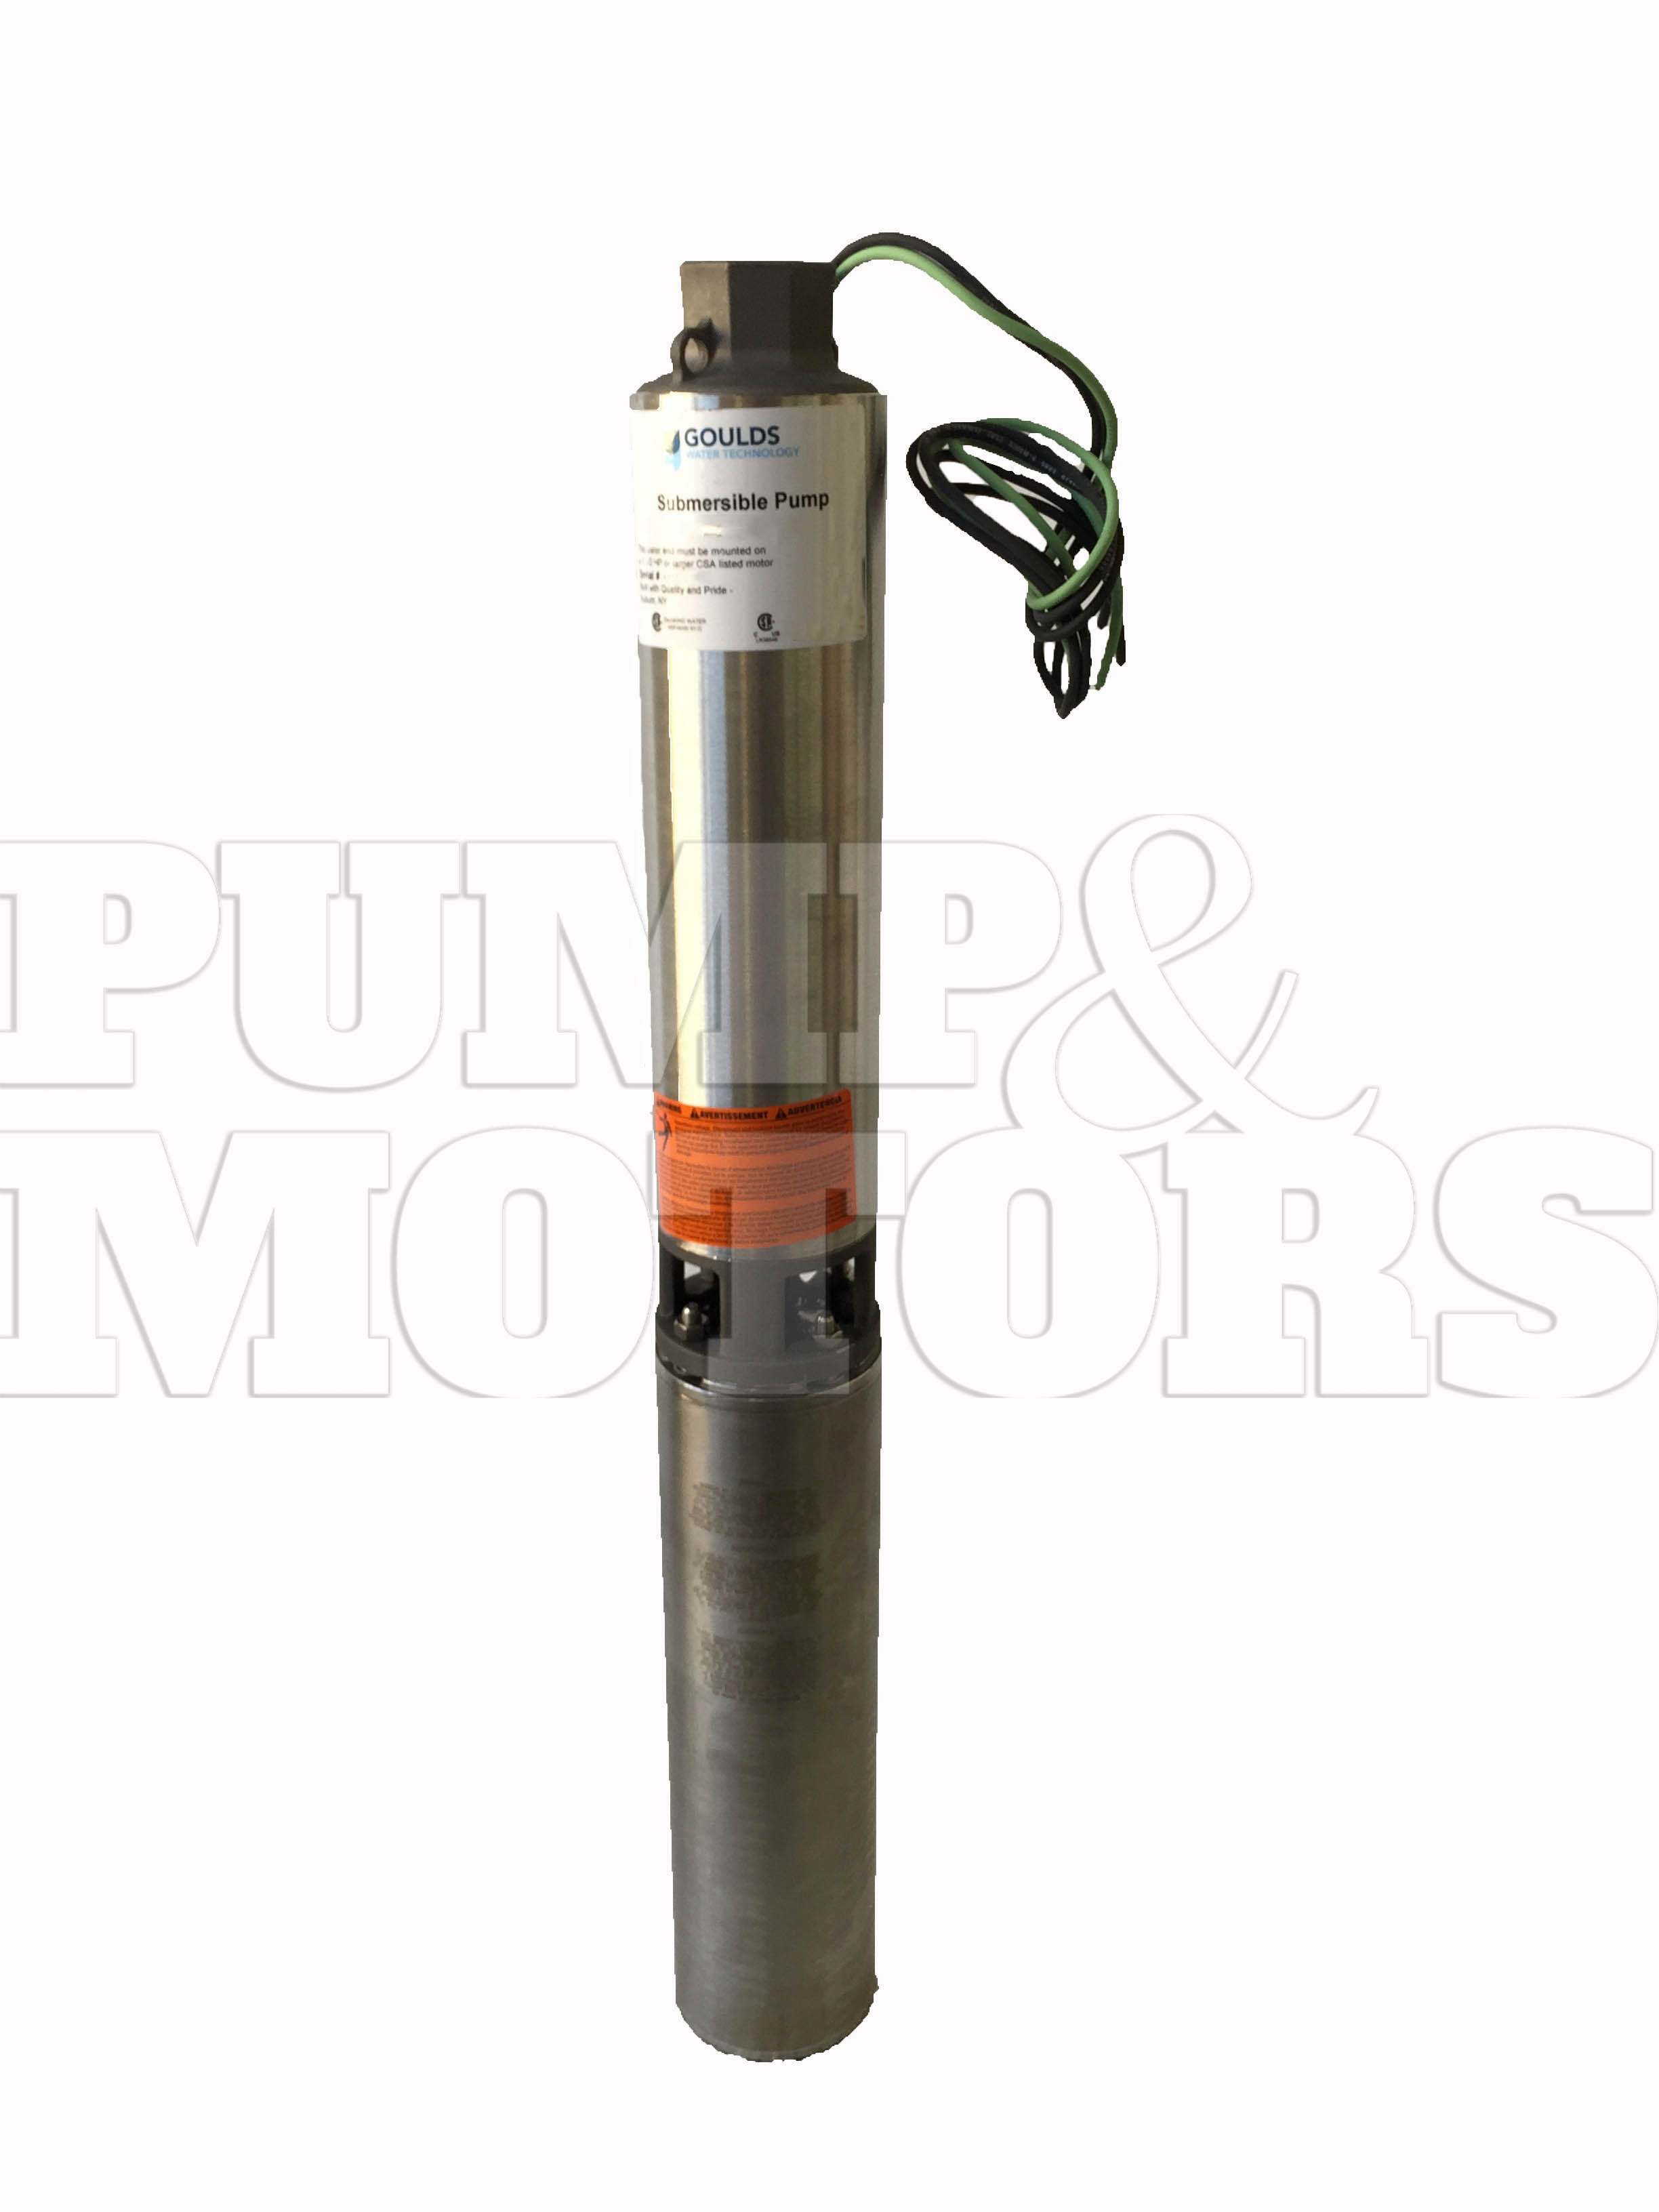 Goulds 25GS10412CL 1 HP 230V Submersible Water Well Pump 25GPM